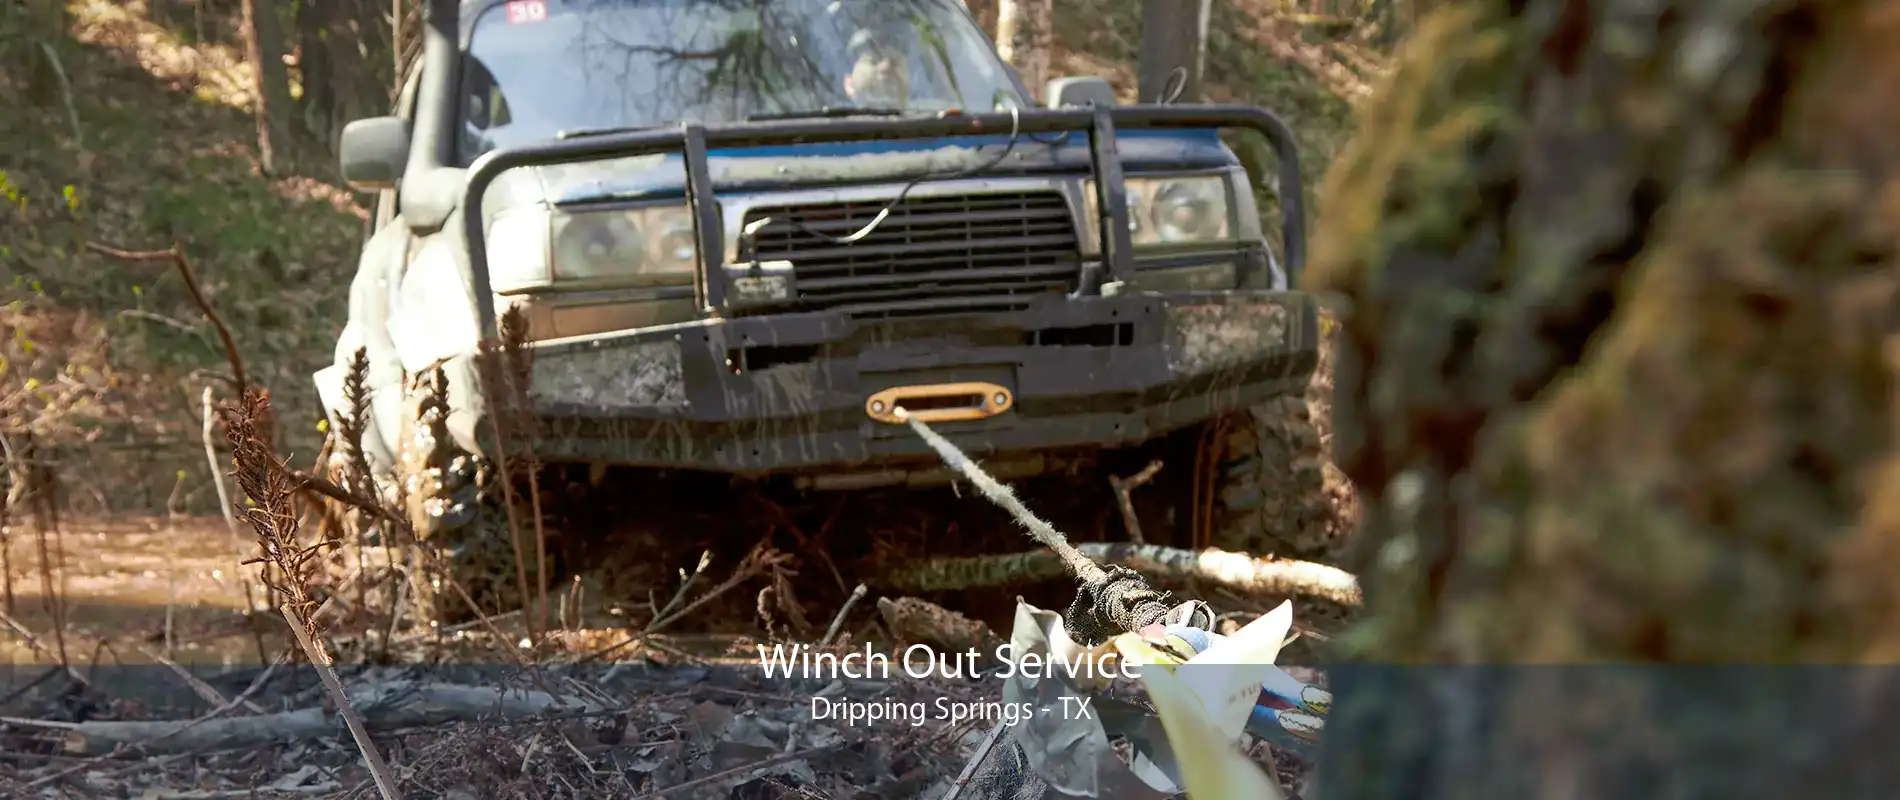 Winch Out Service Dripping Springs - TX